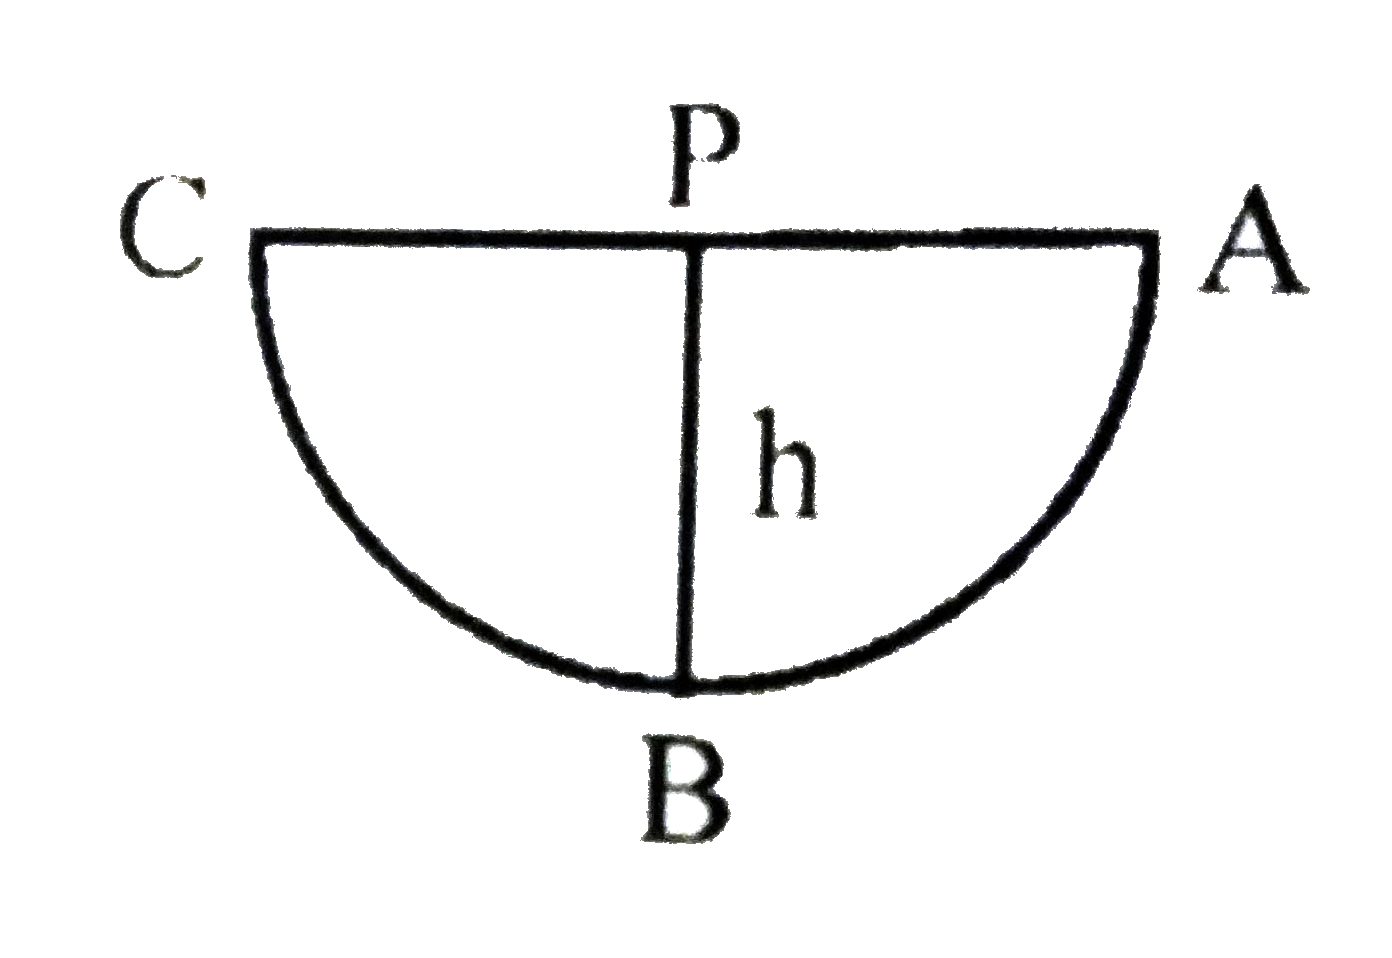 A simple pendulum with a bob of mass m oscillates from A to C and back to A, such that PB=h,      If the acceleration due to gravity is 'g', then the velocity of the bob as it passes through B is